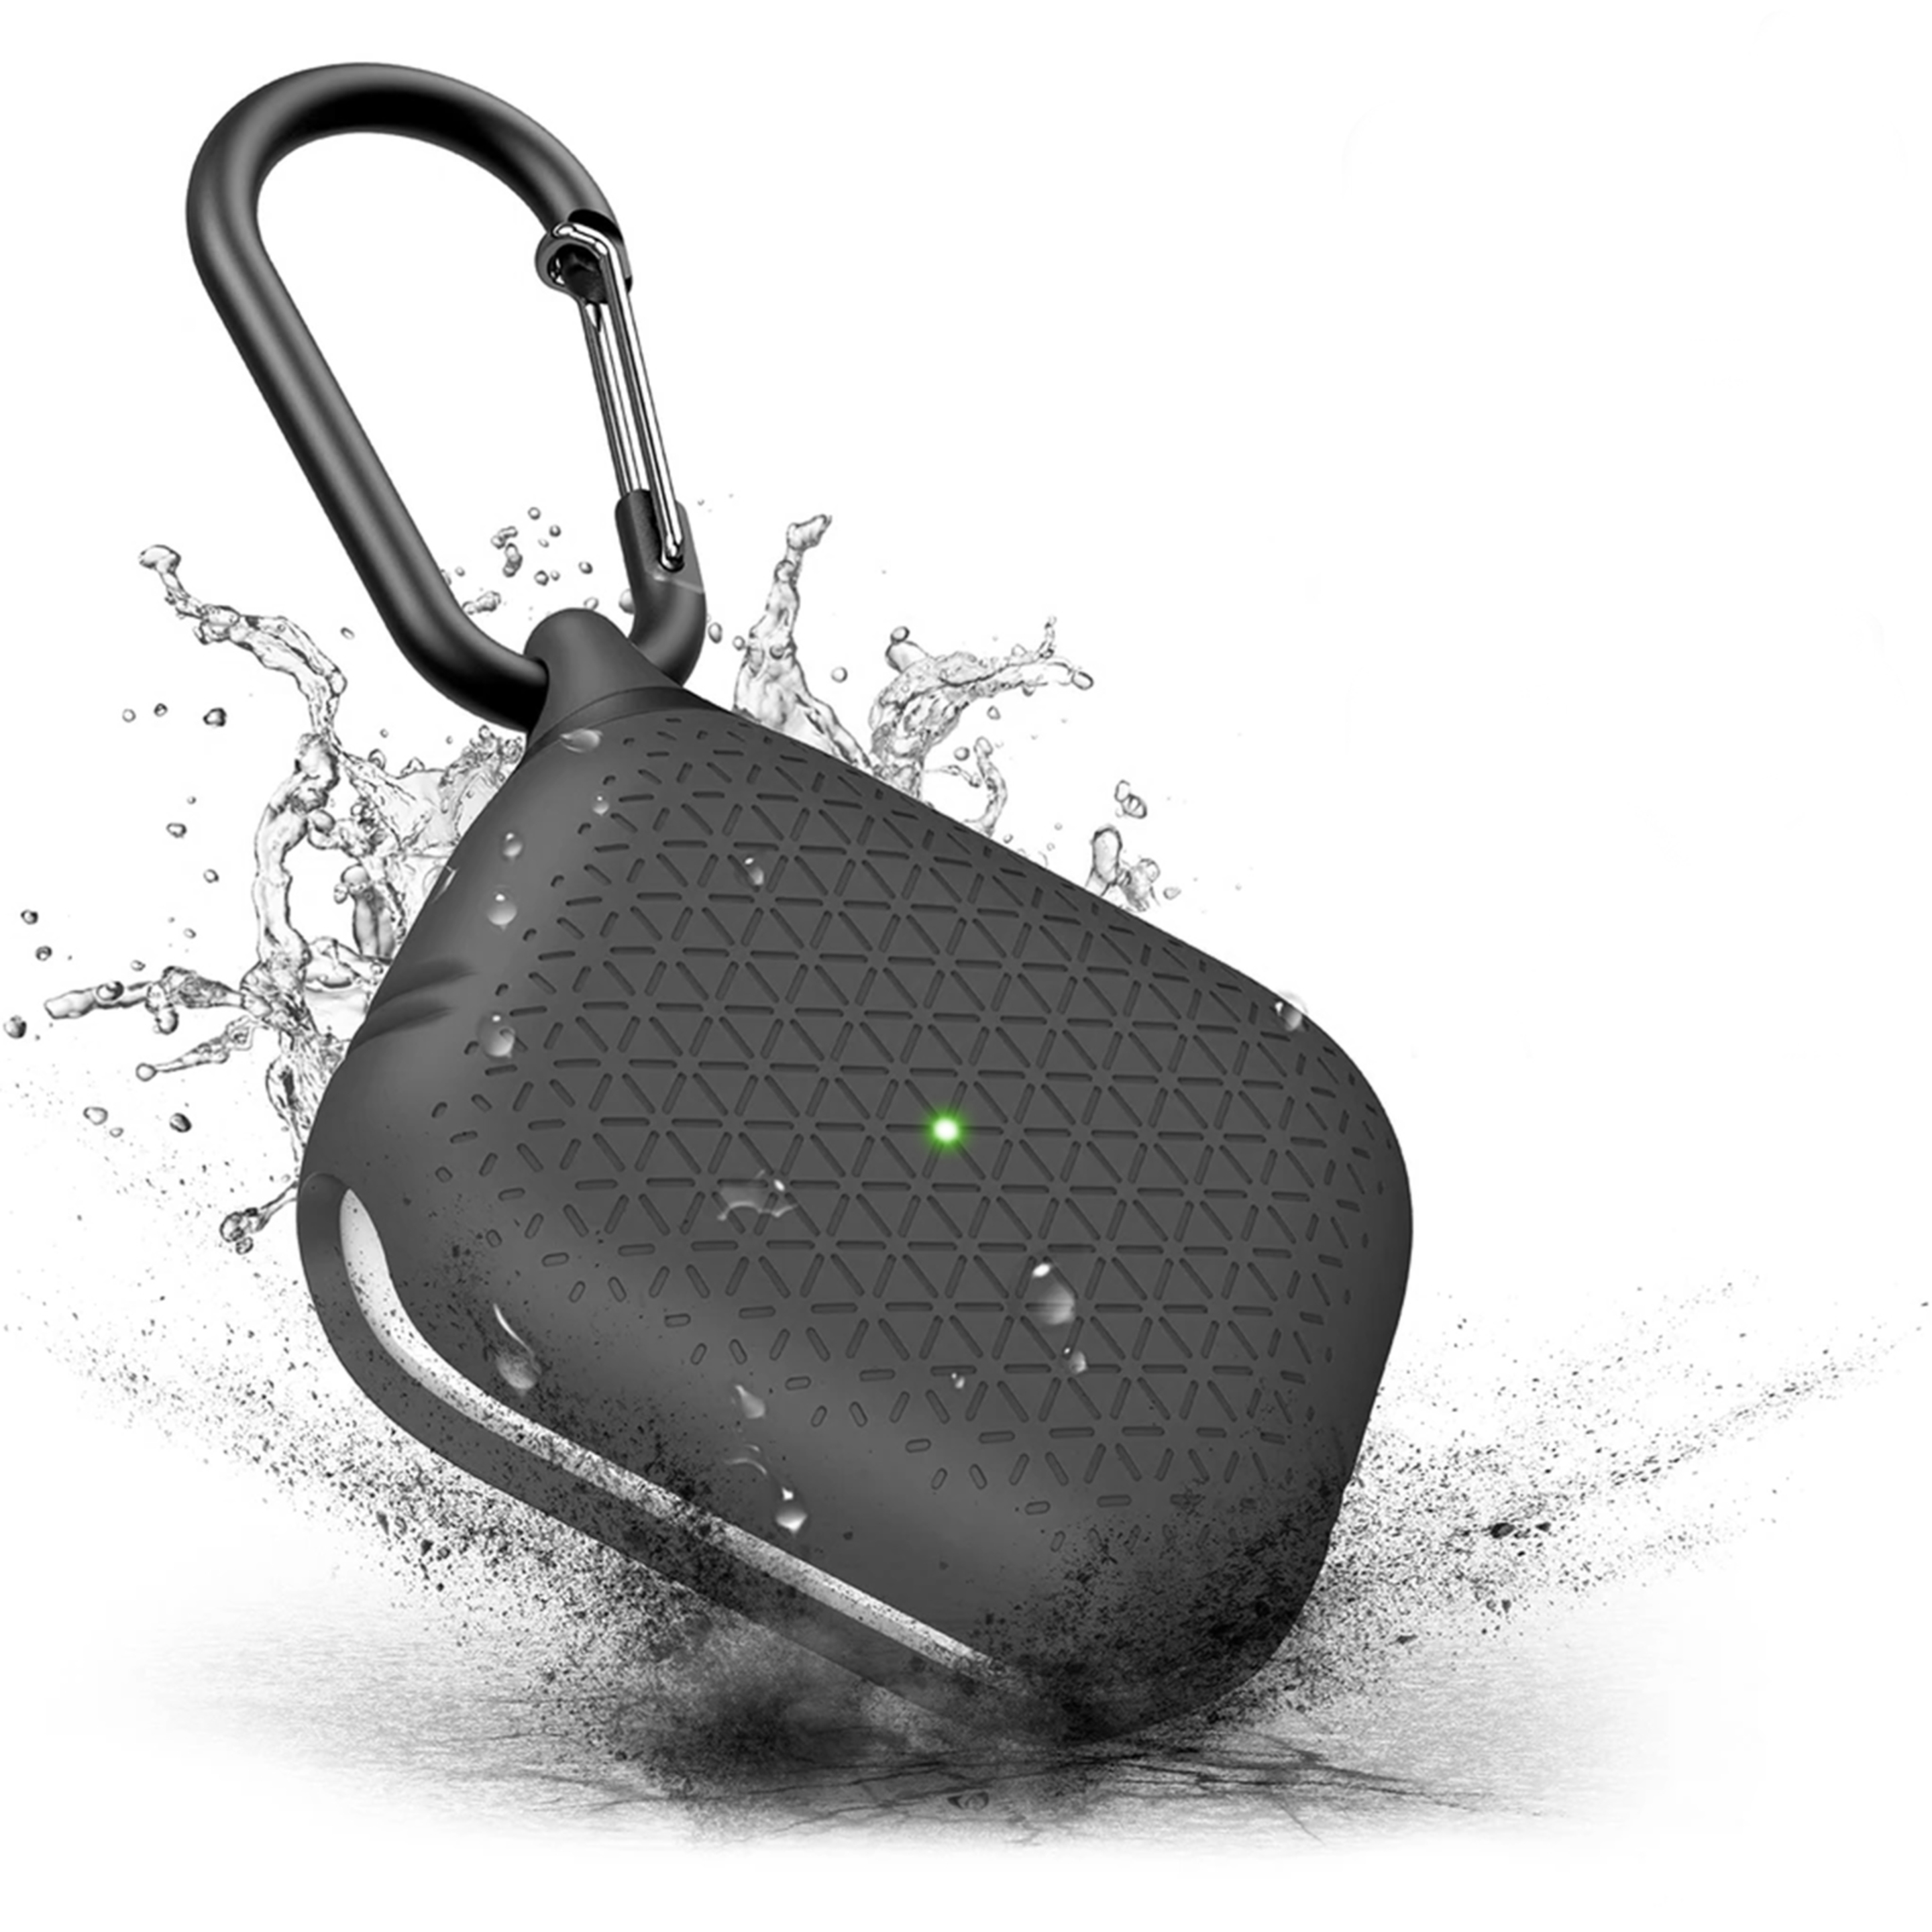 Funda Catalyst Airpods Pro Impermeable Ip67 + Mosquetón